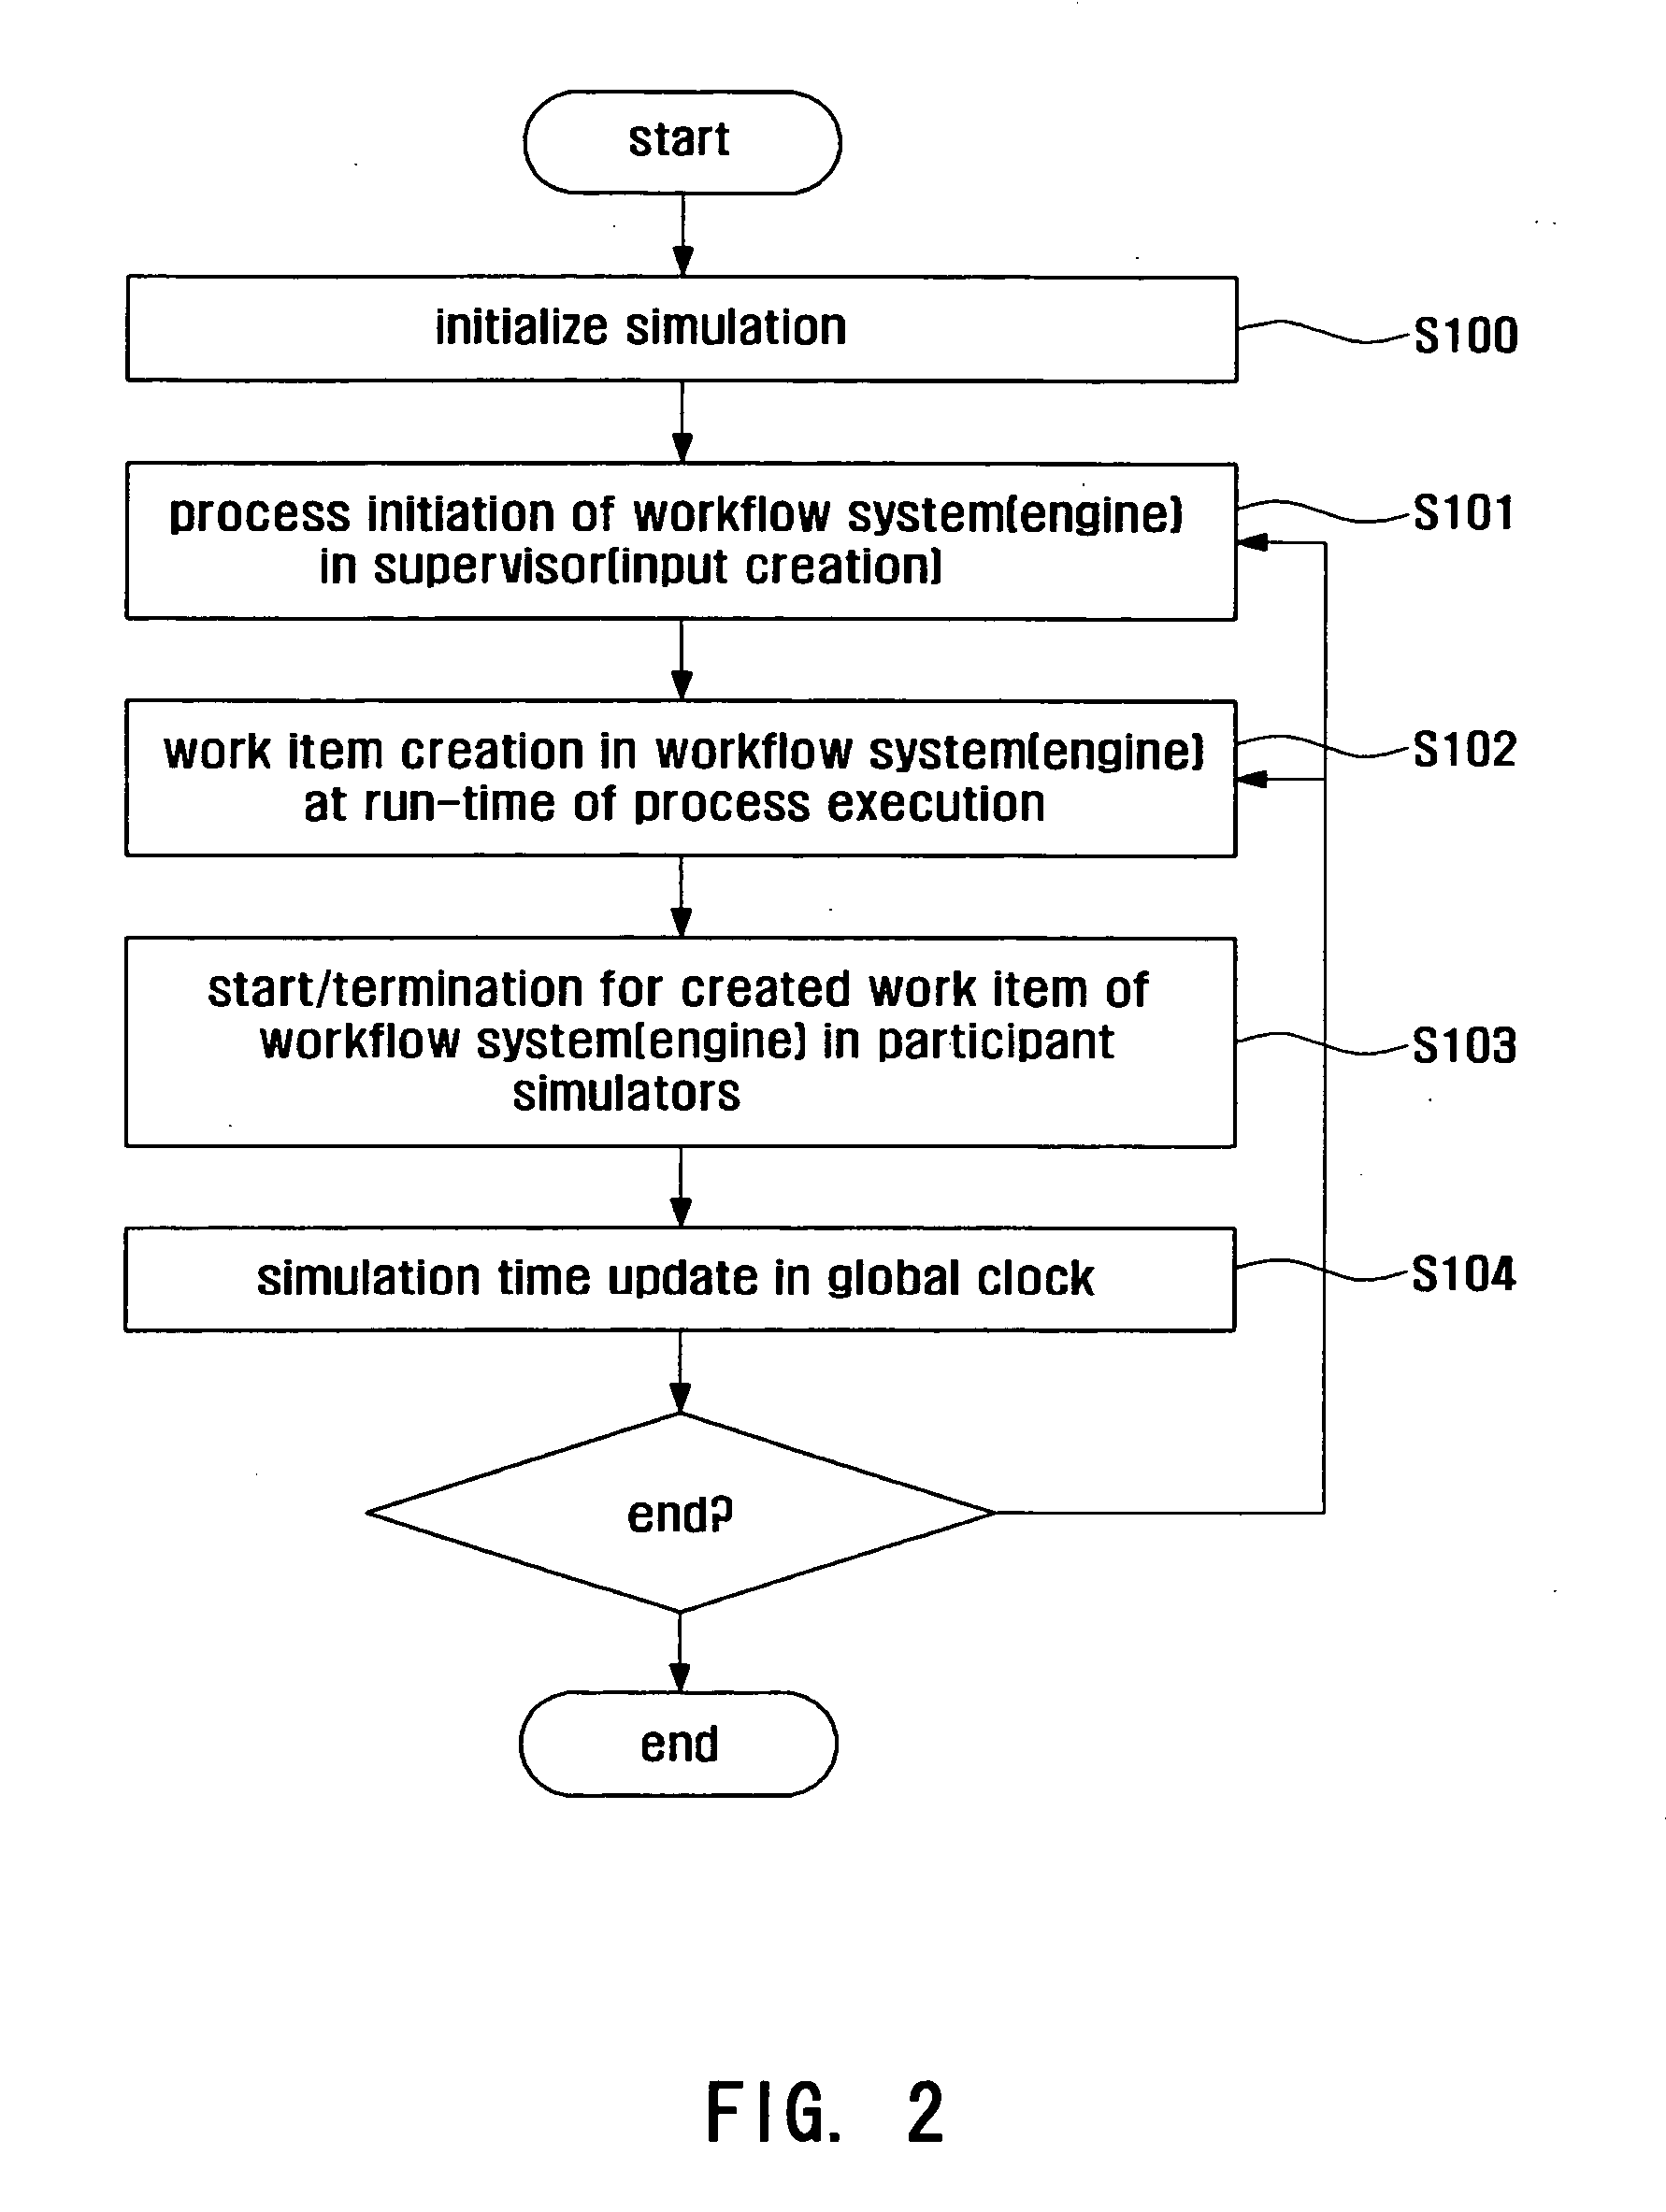 System and a method for workflow system (engine) based workflow model simulation